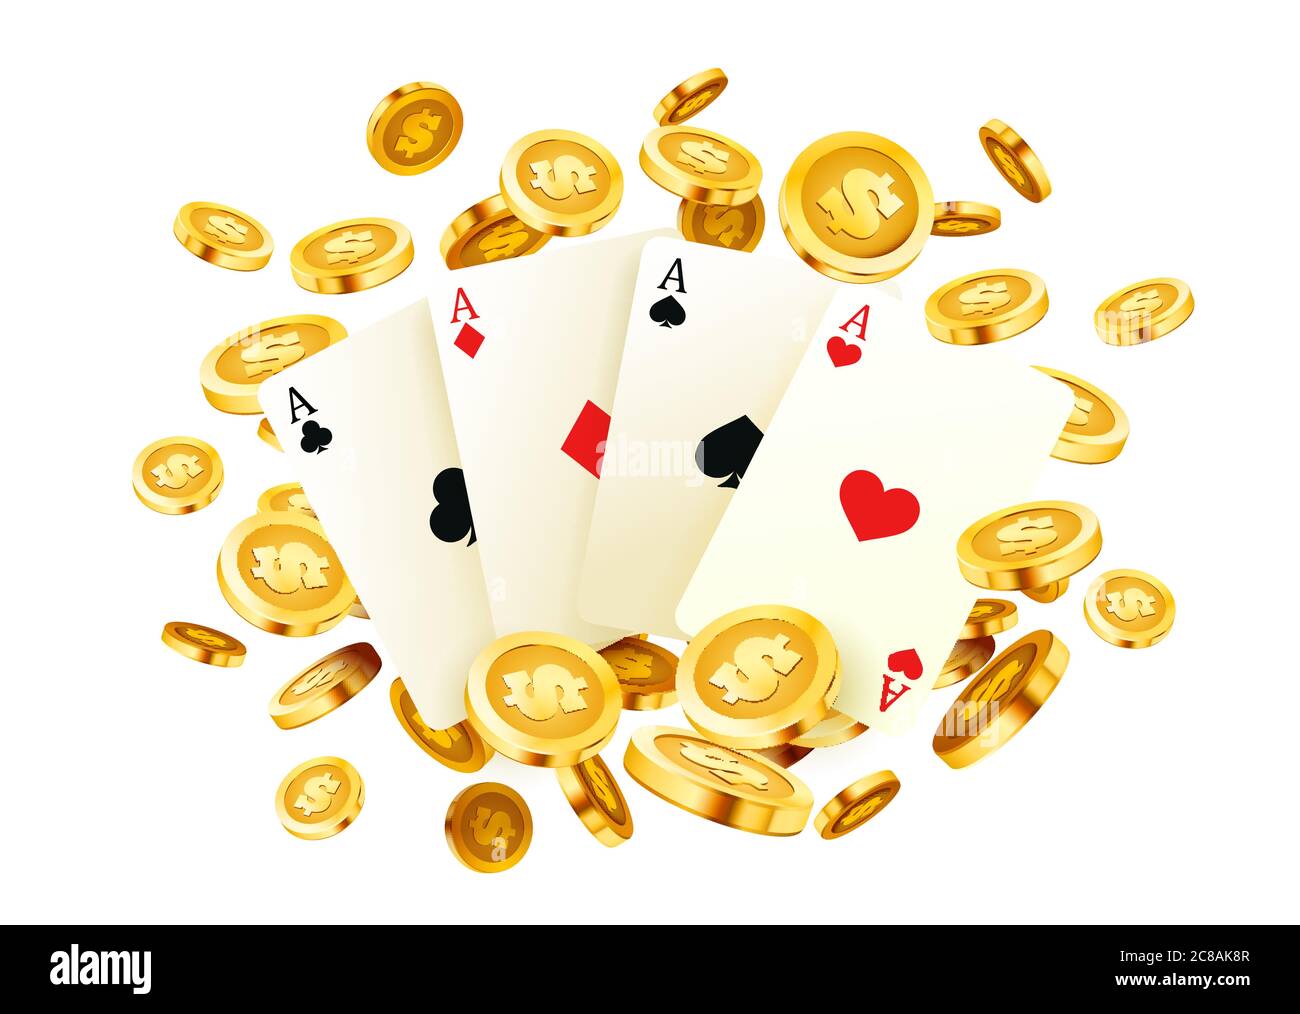 Listen To Your Customers. They Will Tell You All About new btc casino